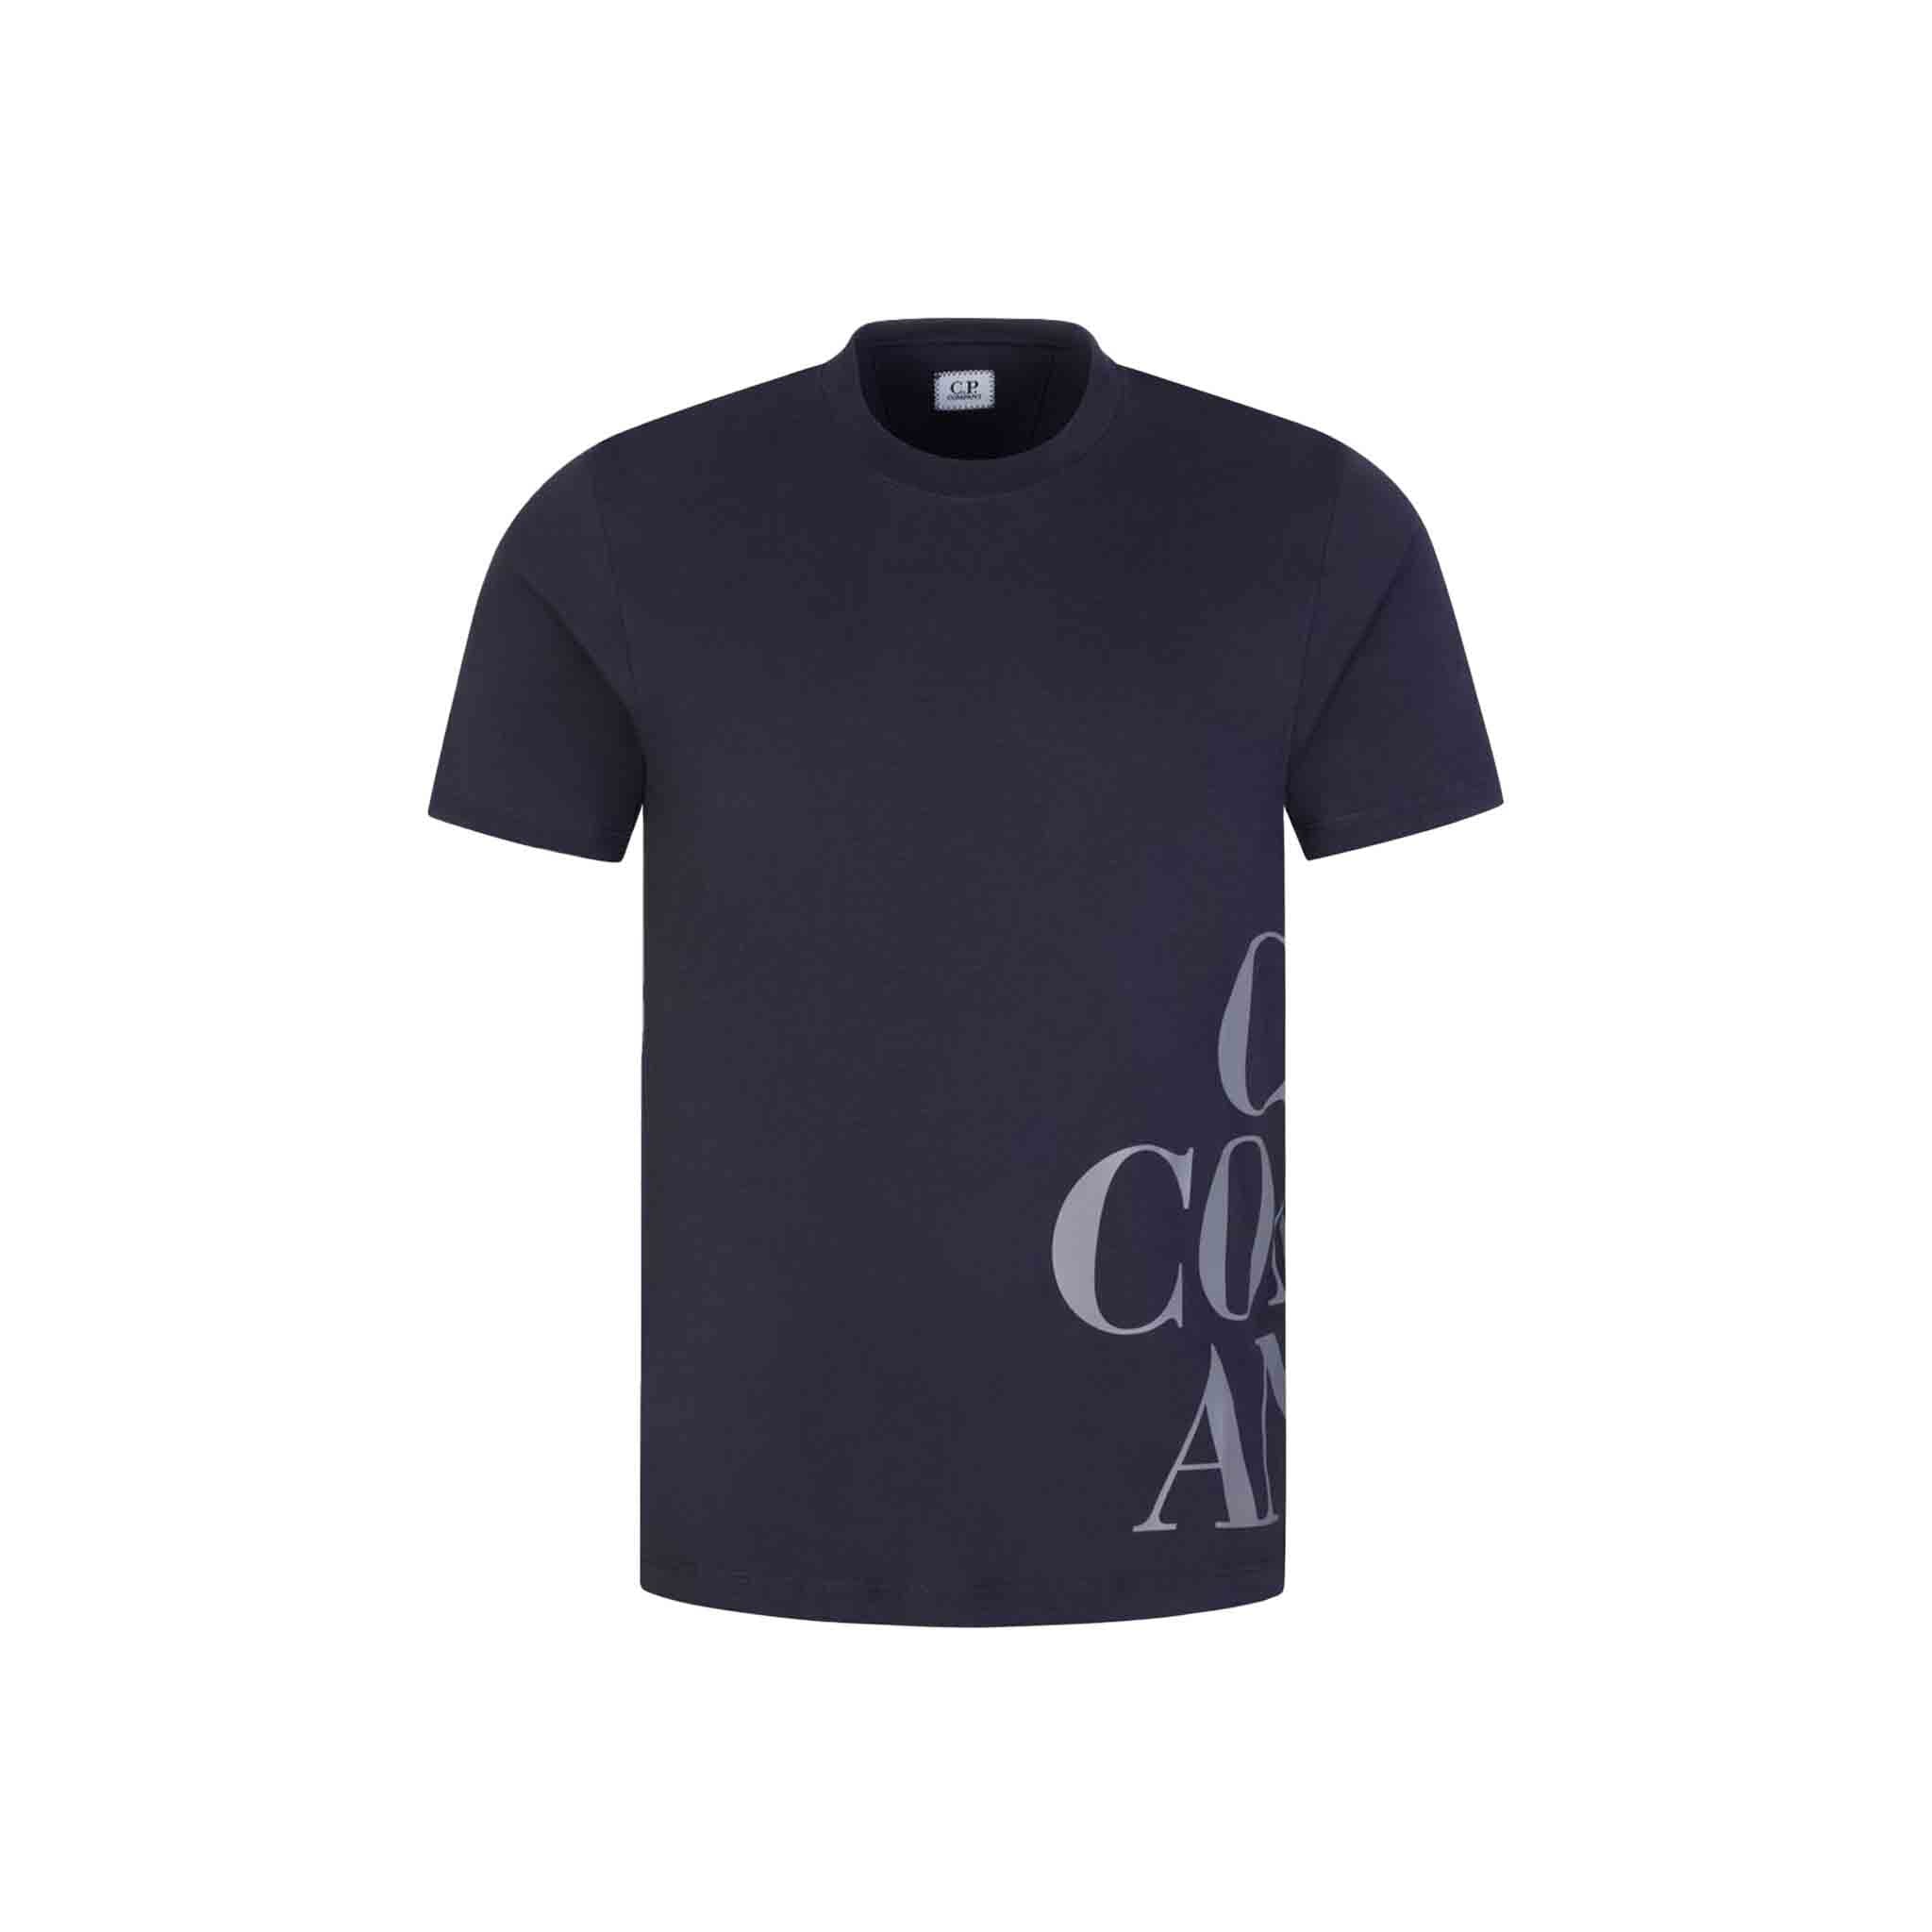 A ribbed neck T-shirt featuring a C.P. Company chest logo, crafted in 30/1 cotton jersey, for a midweight fit that remains highly breathable.